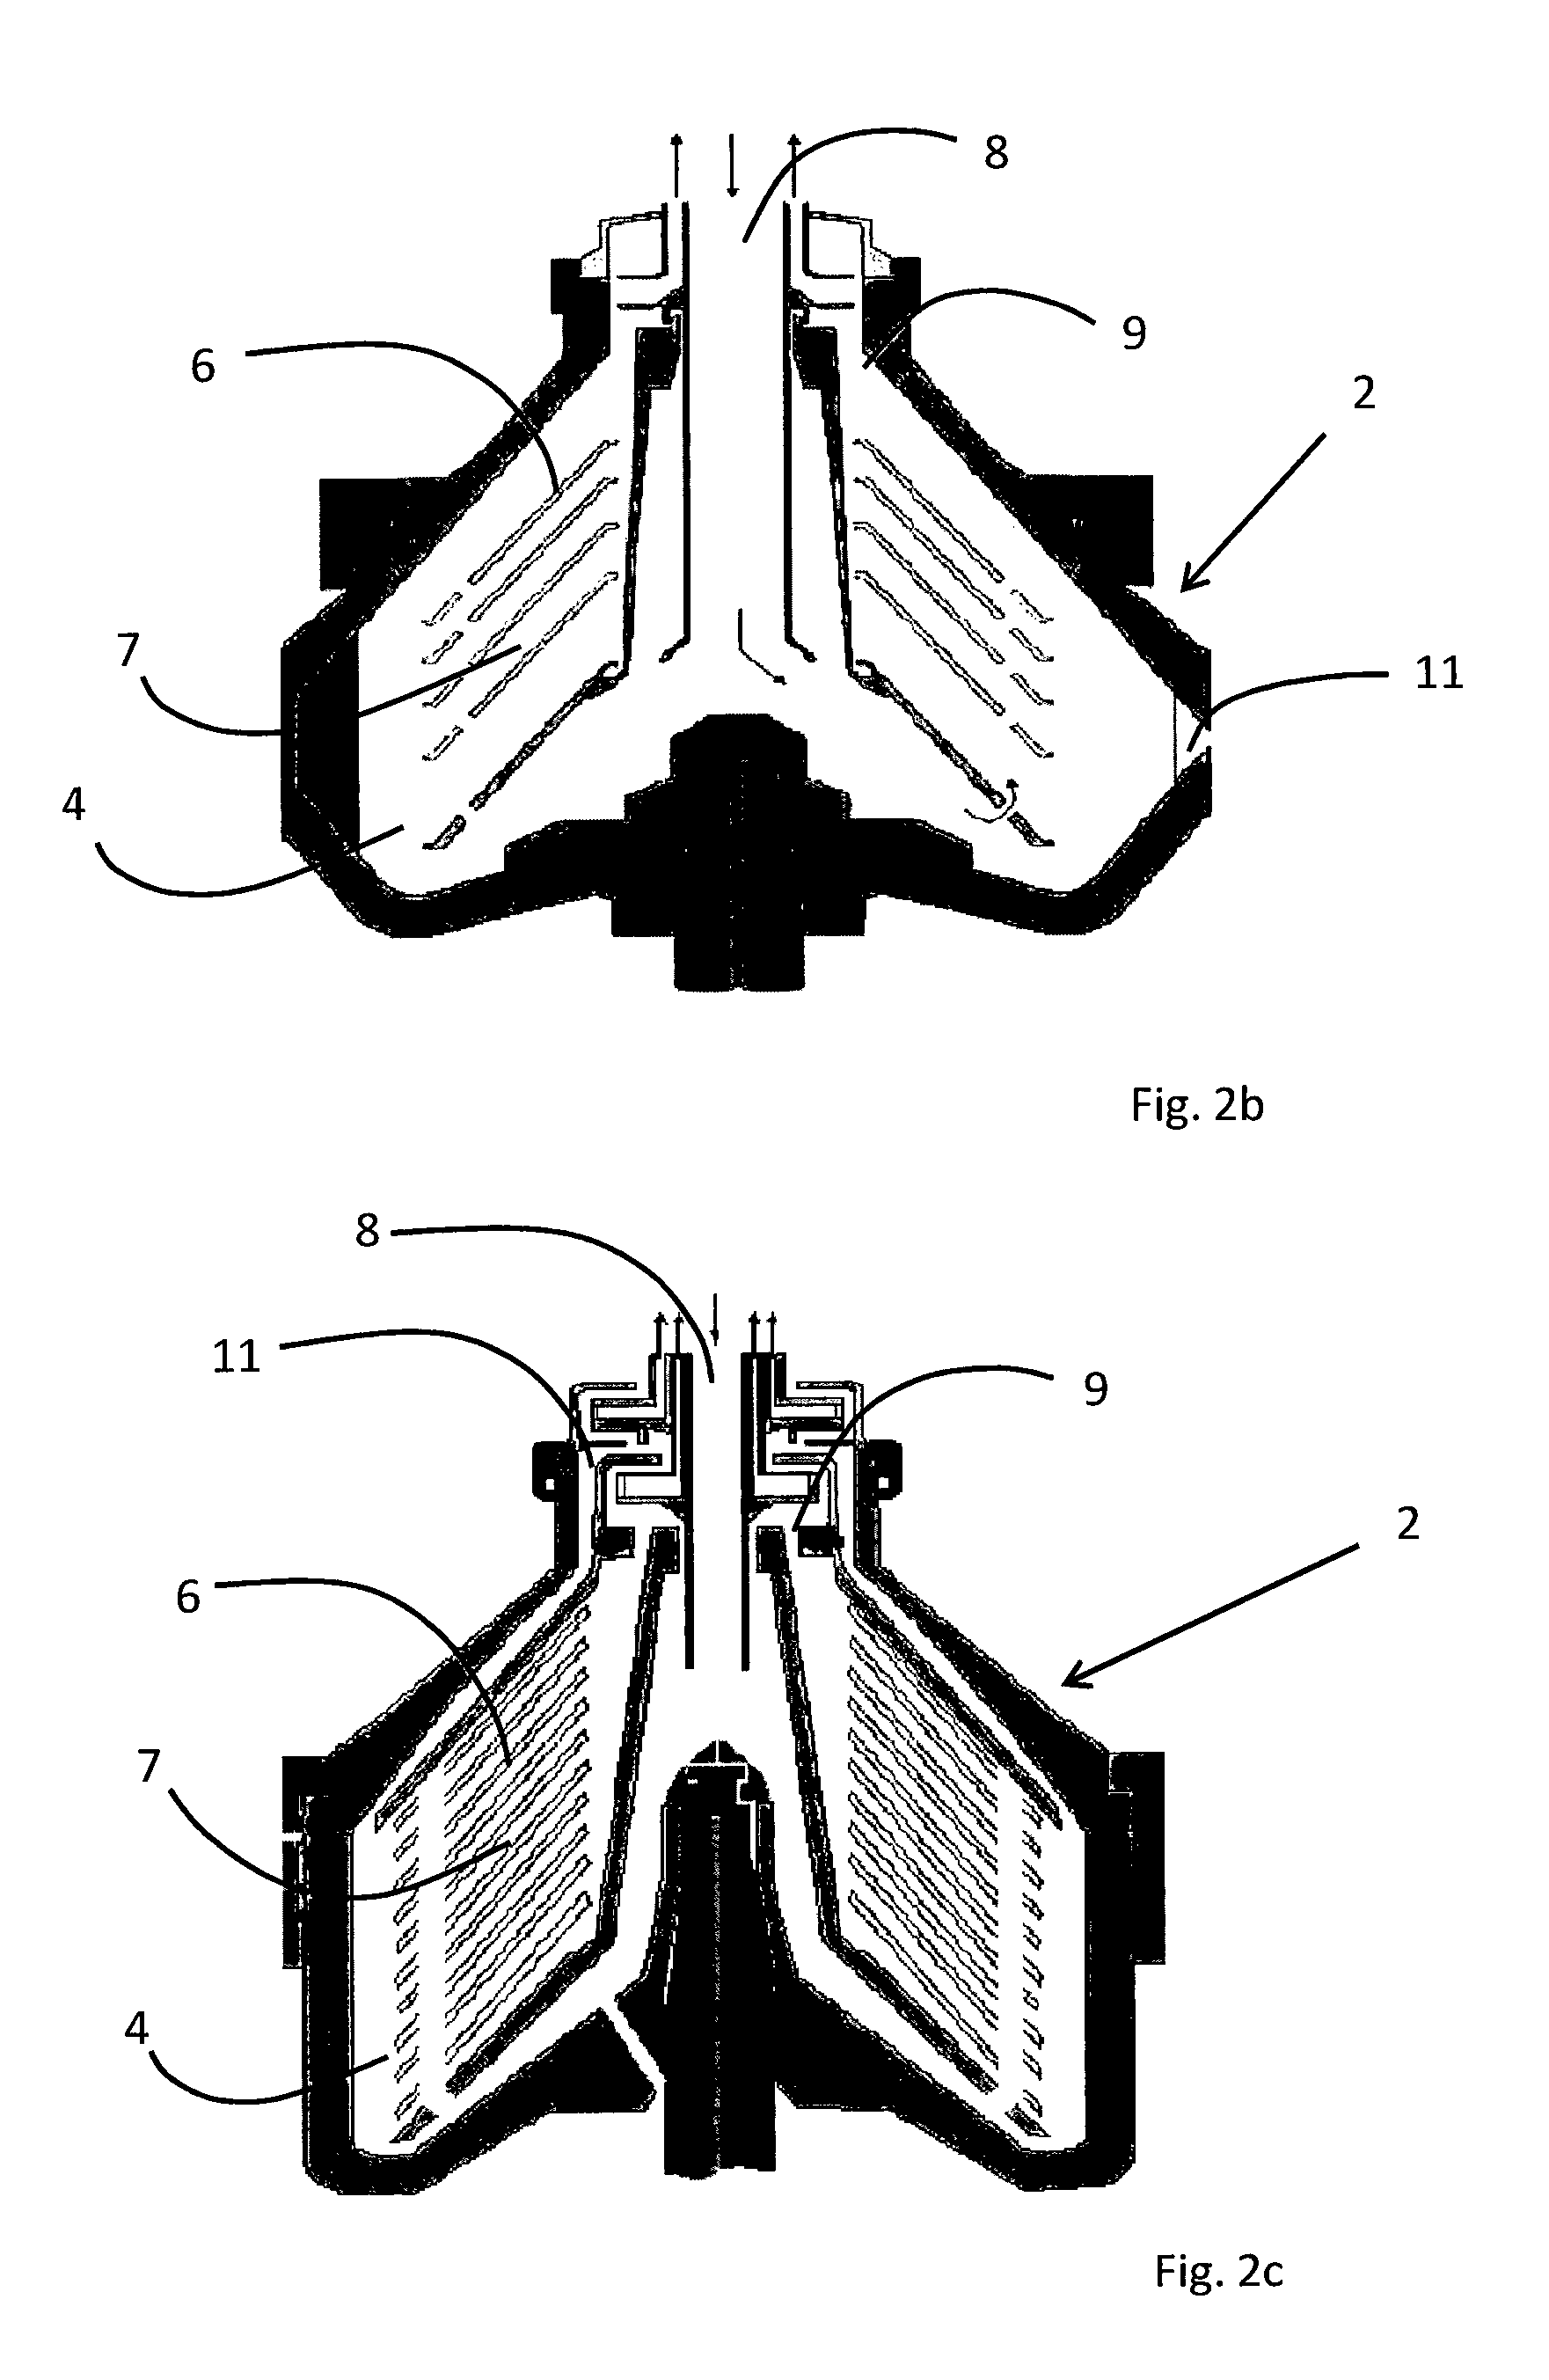 Centrifugal separator with Anti-fouling properties